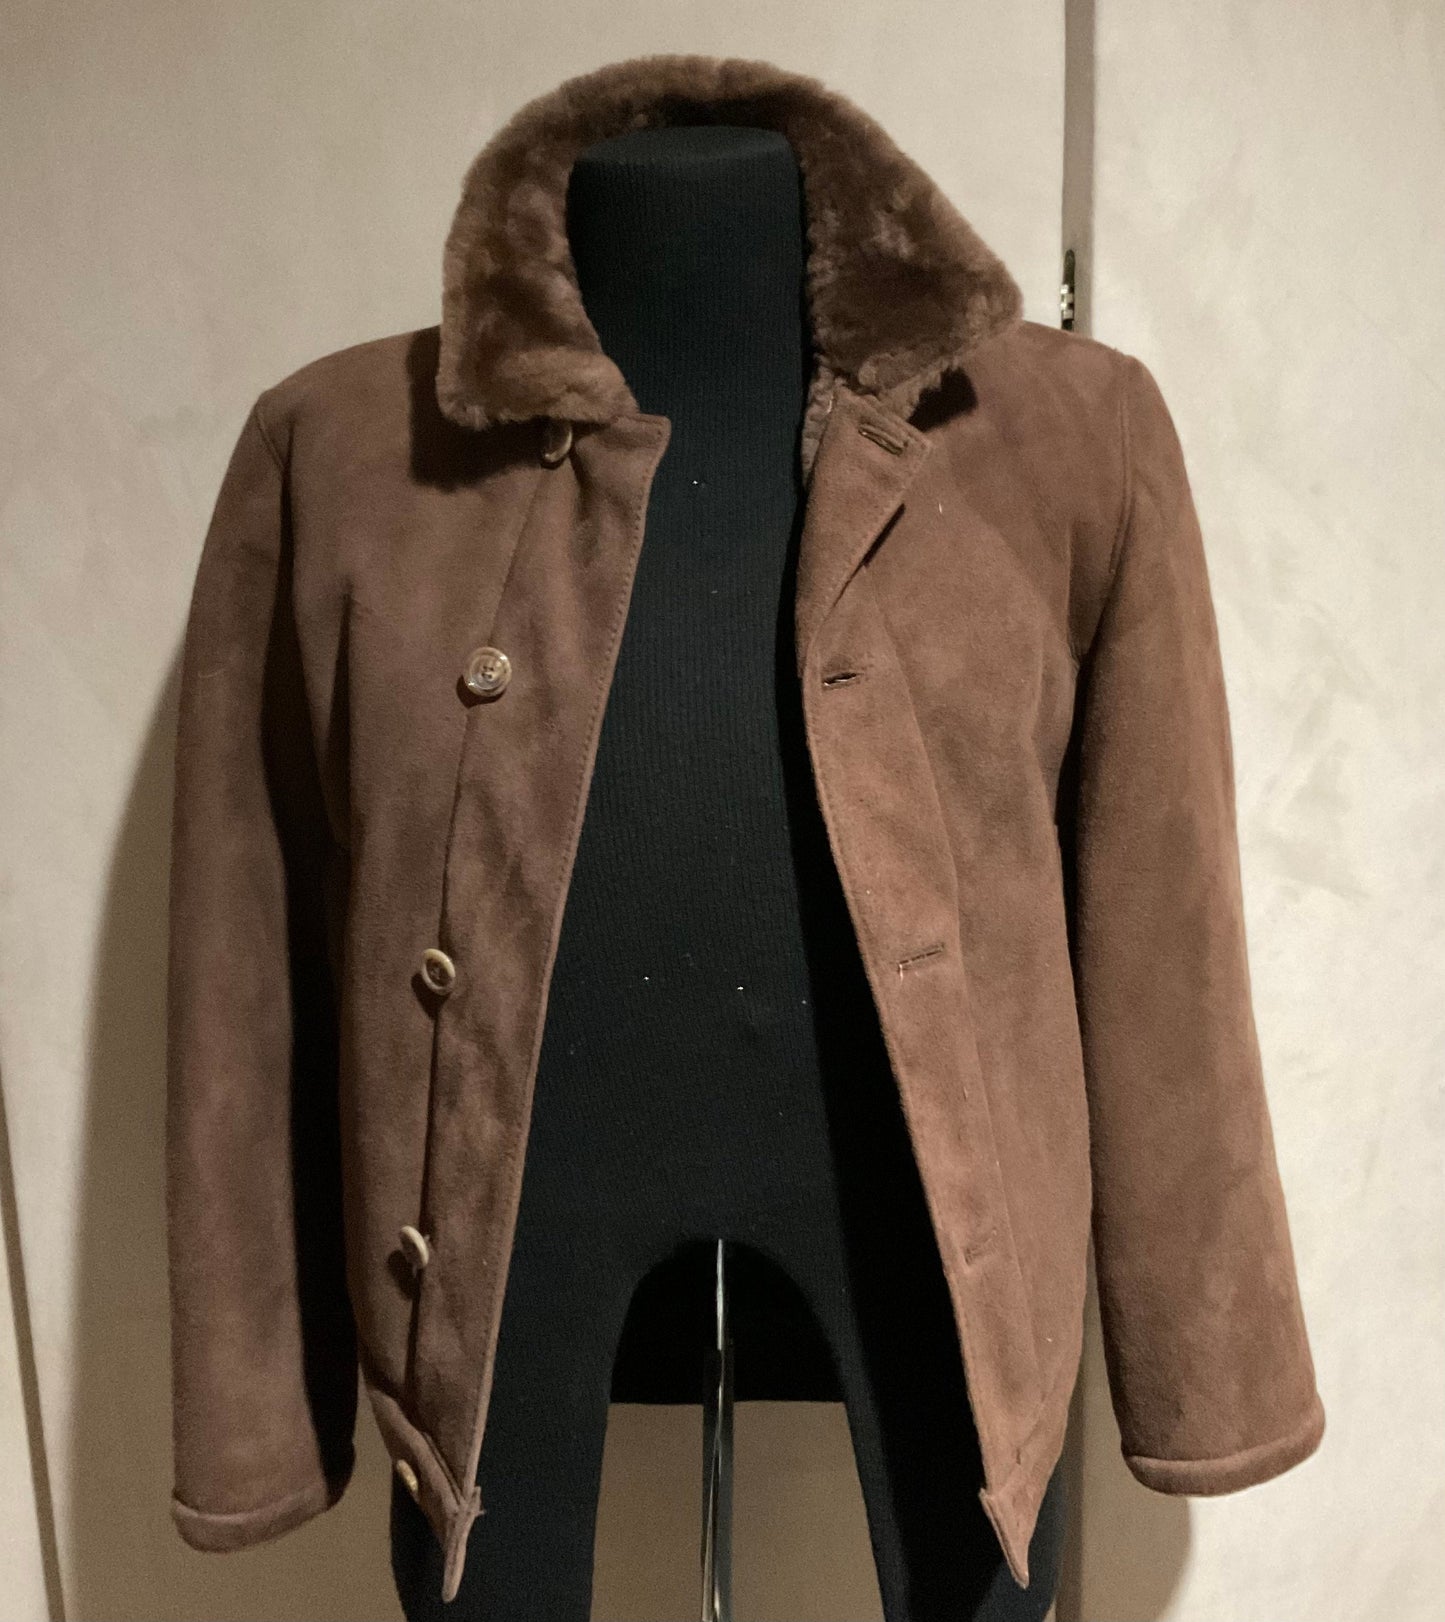 SHEARLING JACKET / BROWN / SMALL / CRAFTED IN USA